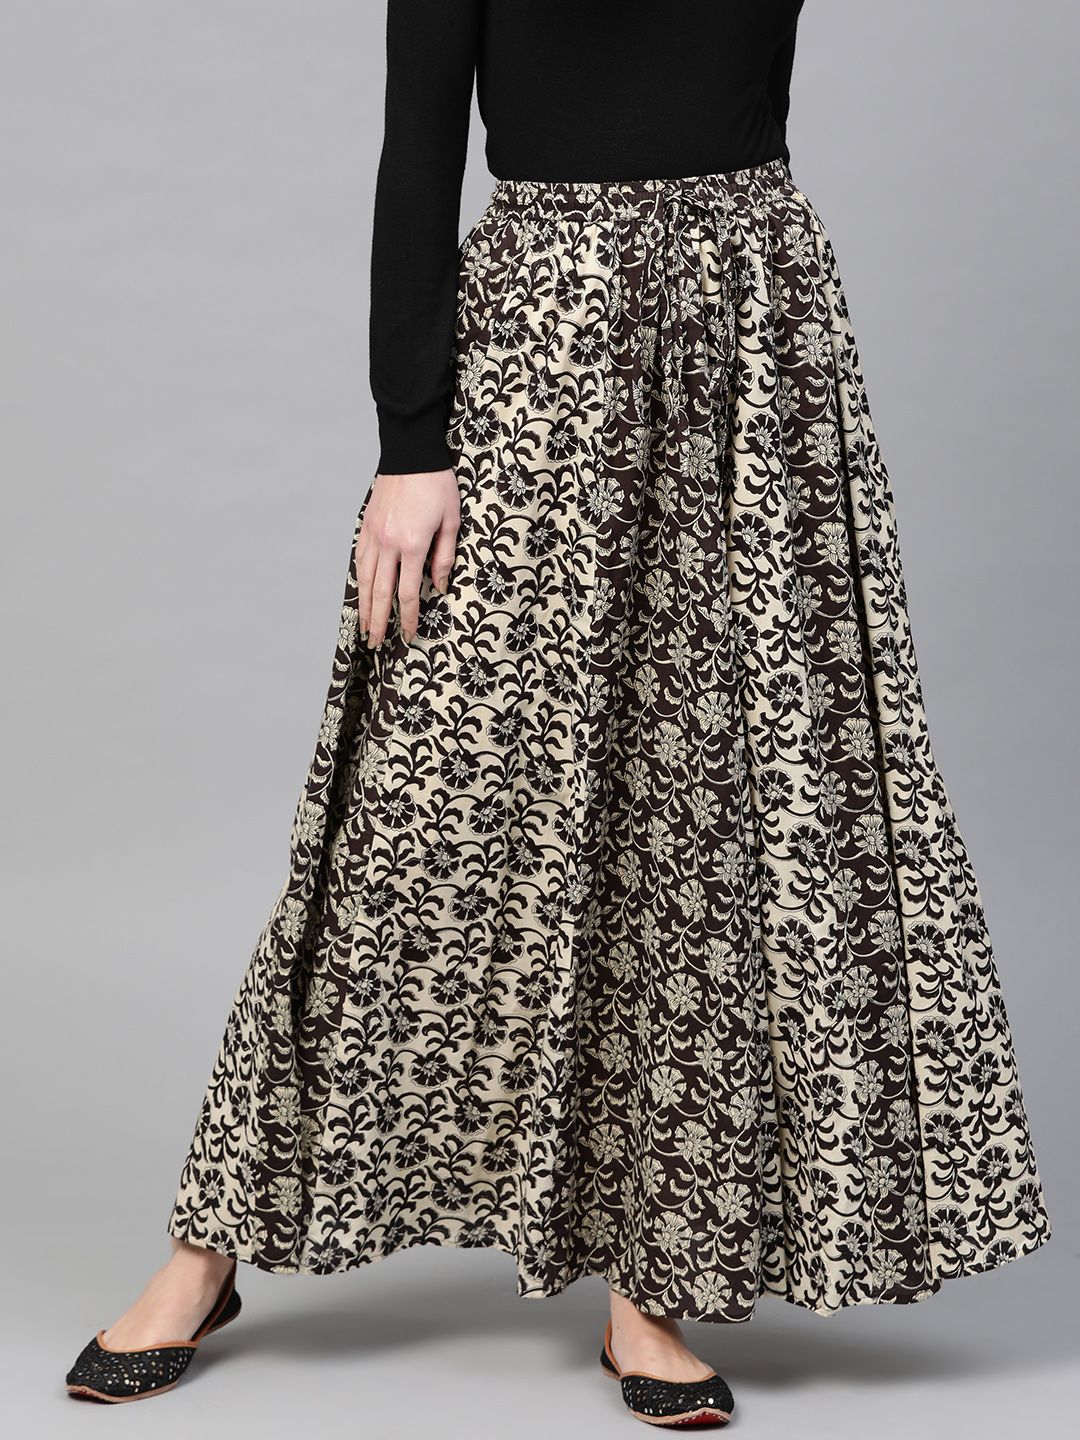 anayna Black & Beige Printed Flared Pure Cotton Maxi Skirt Price in India